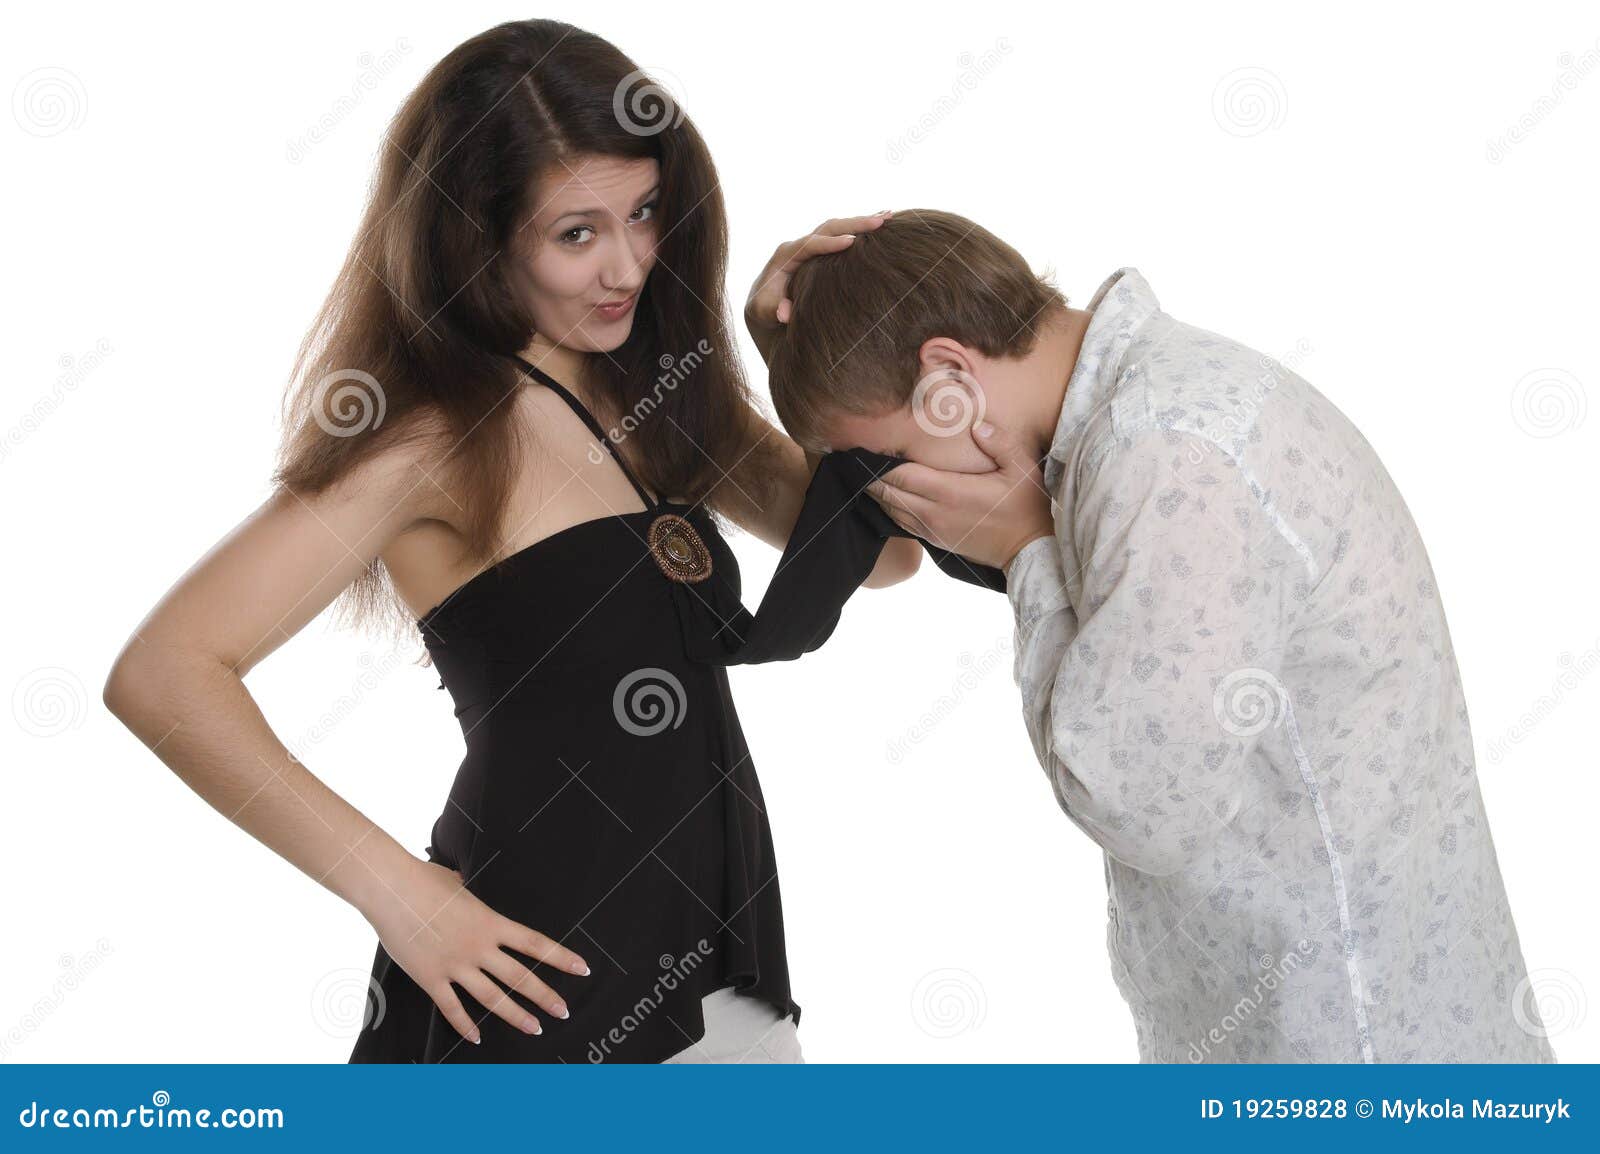 Crying boy stock photo. Image of persons, lady, togetherness ...